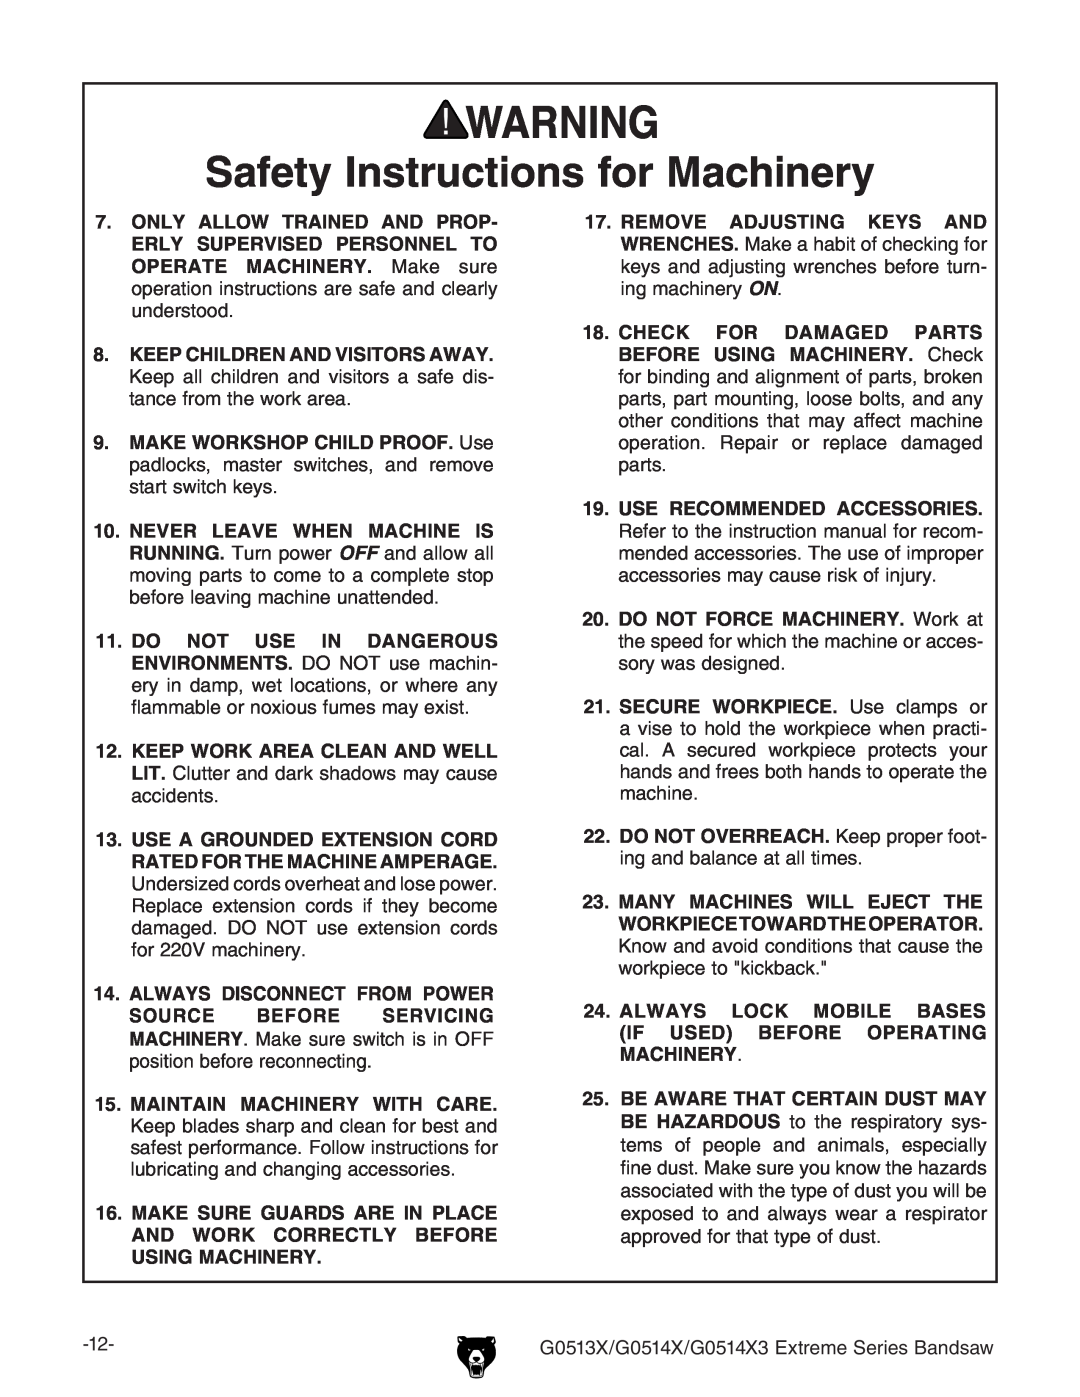 Grizzly G0514X3, G0513X Safety Instructions for Machinery, Always Lock Mobile Bases If Used Before Operating Machinery 